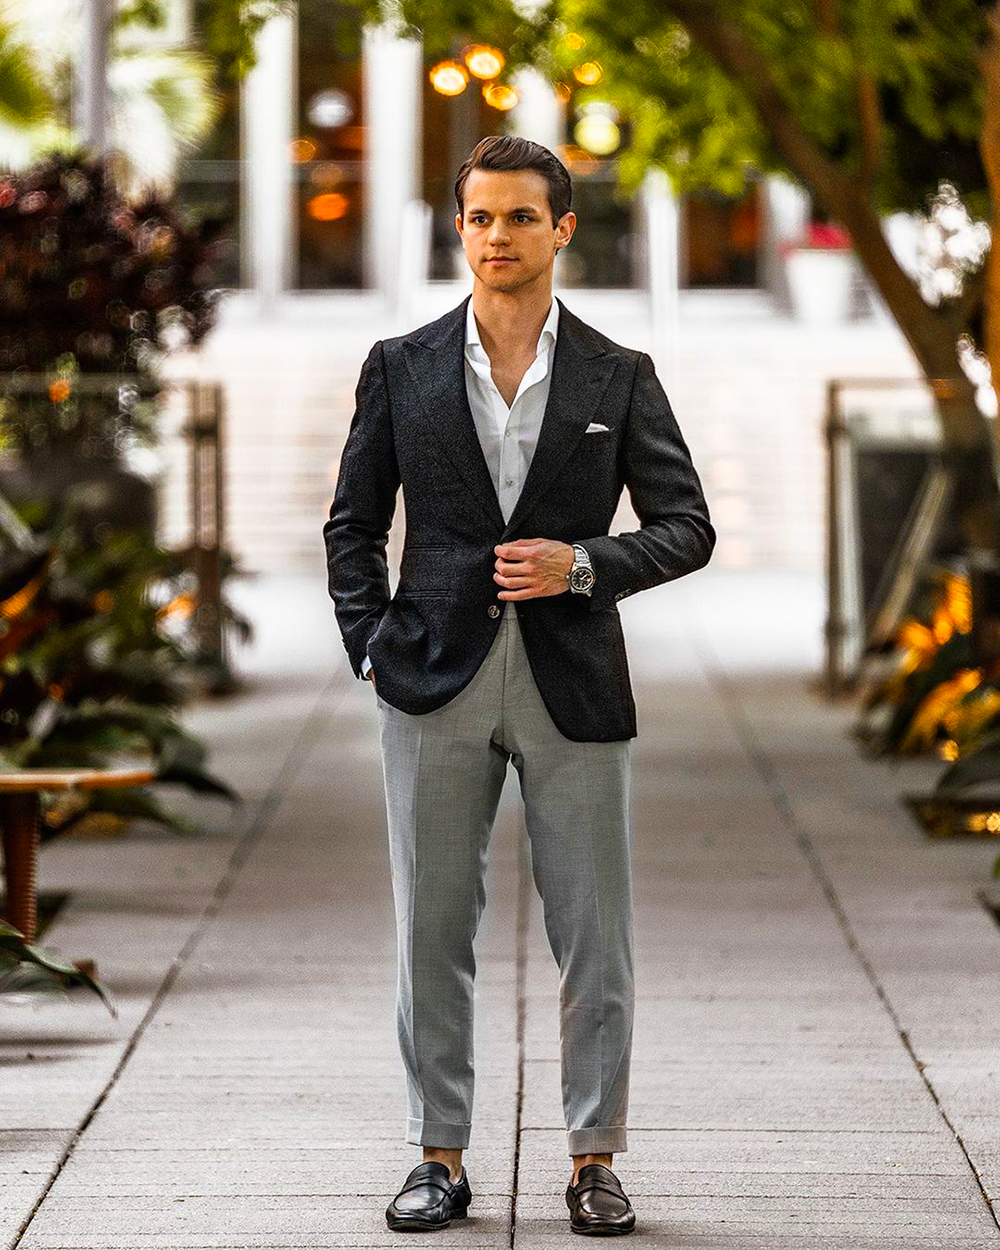 gray dress pants outfit - OFF-59% > Shipping free